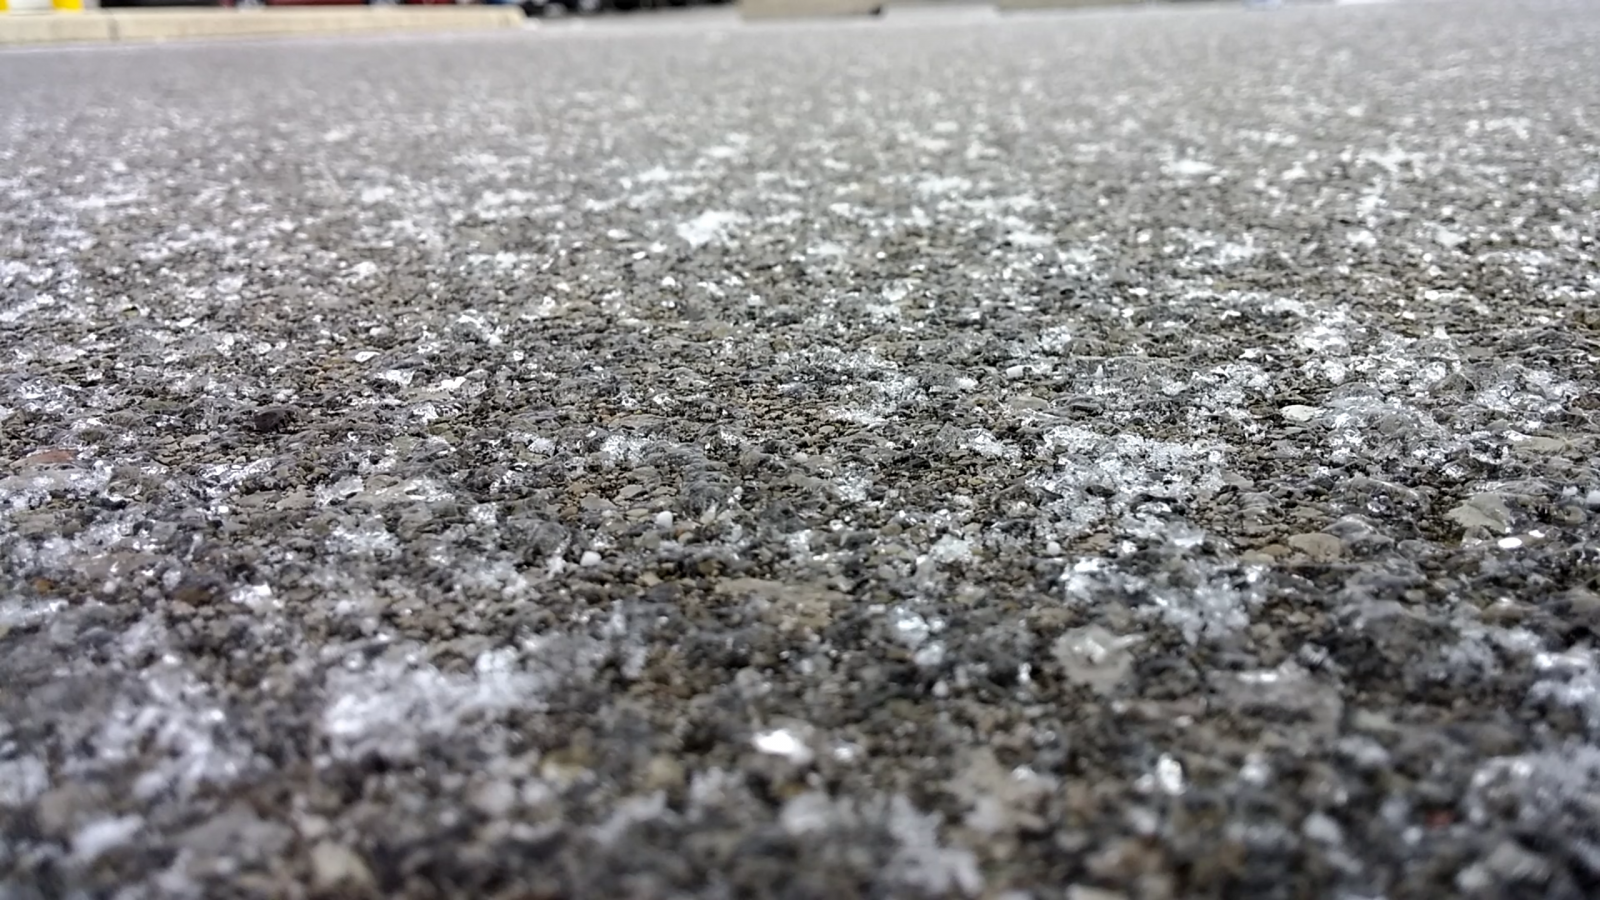 Icy roads have arrived in London, creating difficult driving conditions. (Photo by Samuel Gallant)